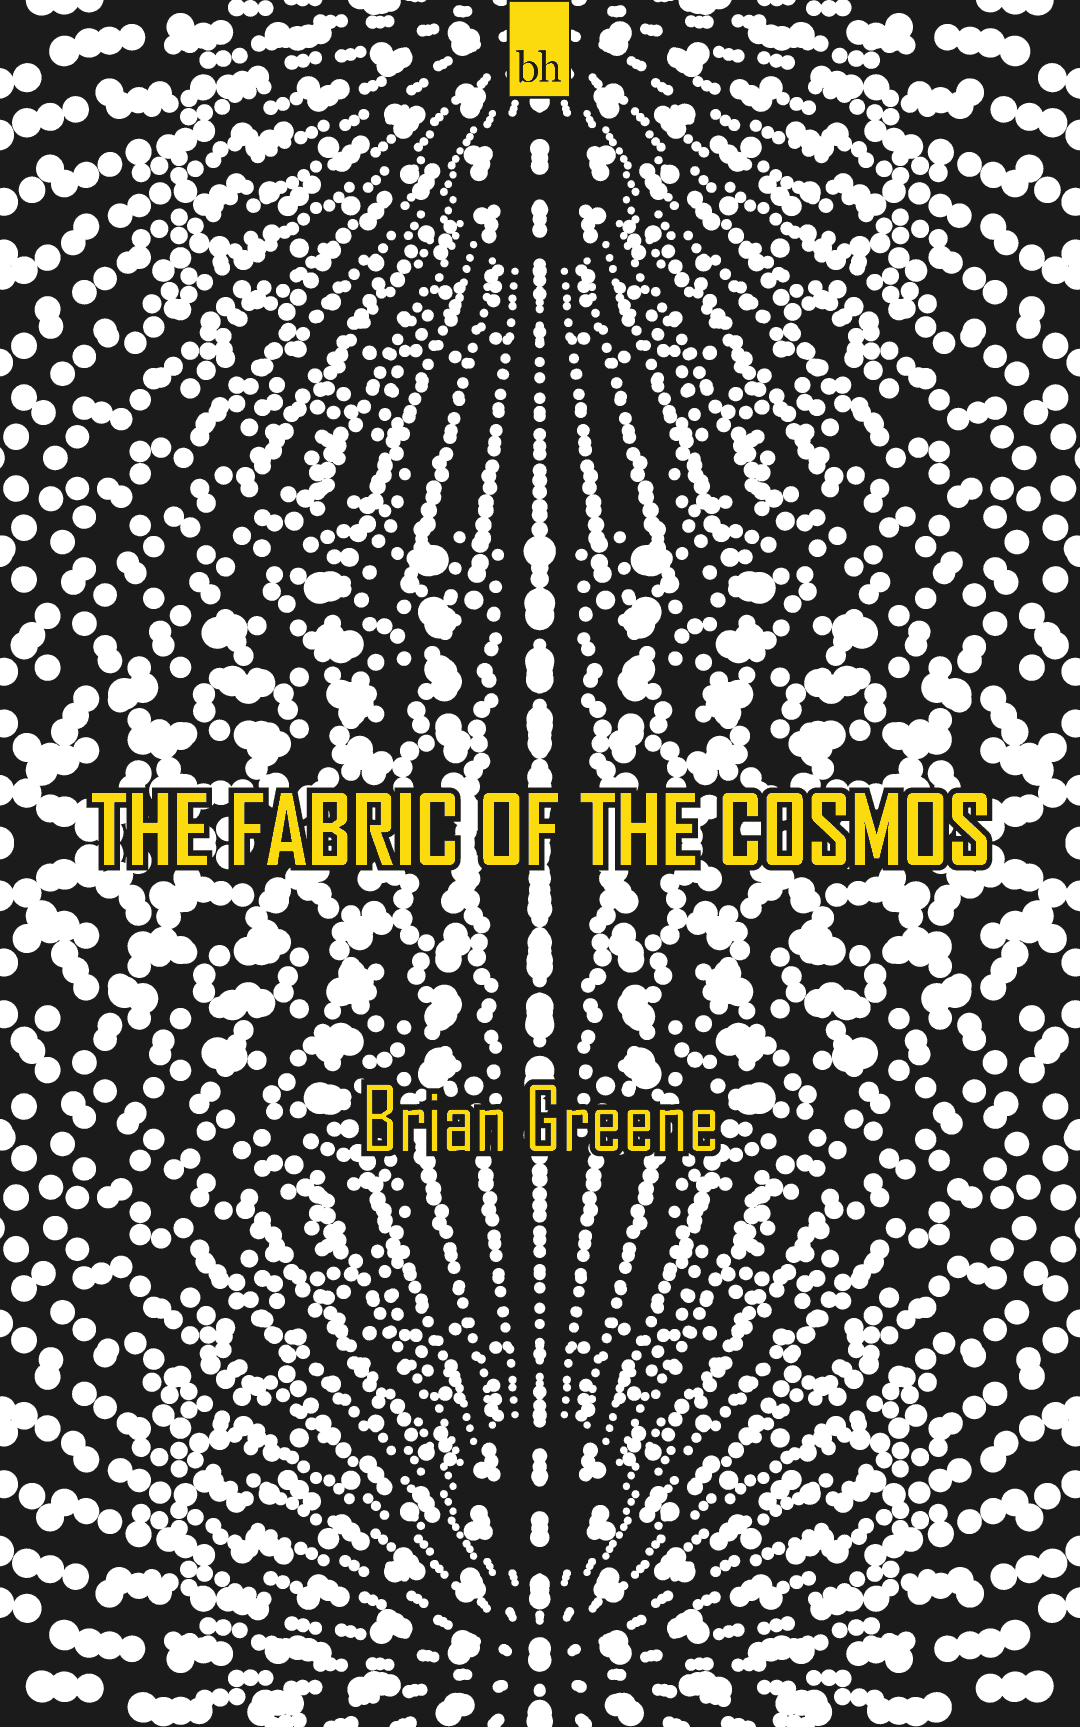 The Fabric of The Cosmos by Brian Greene